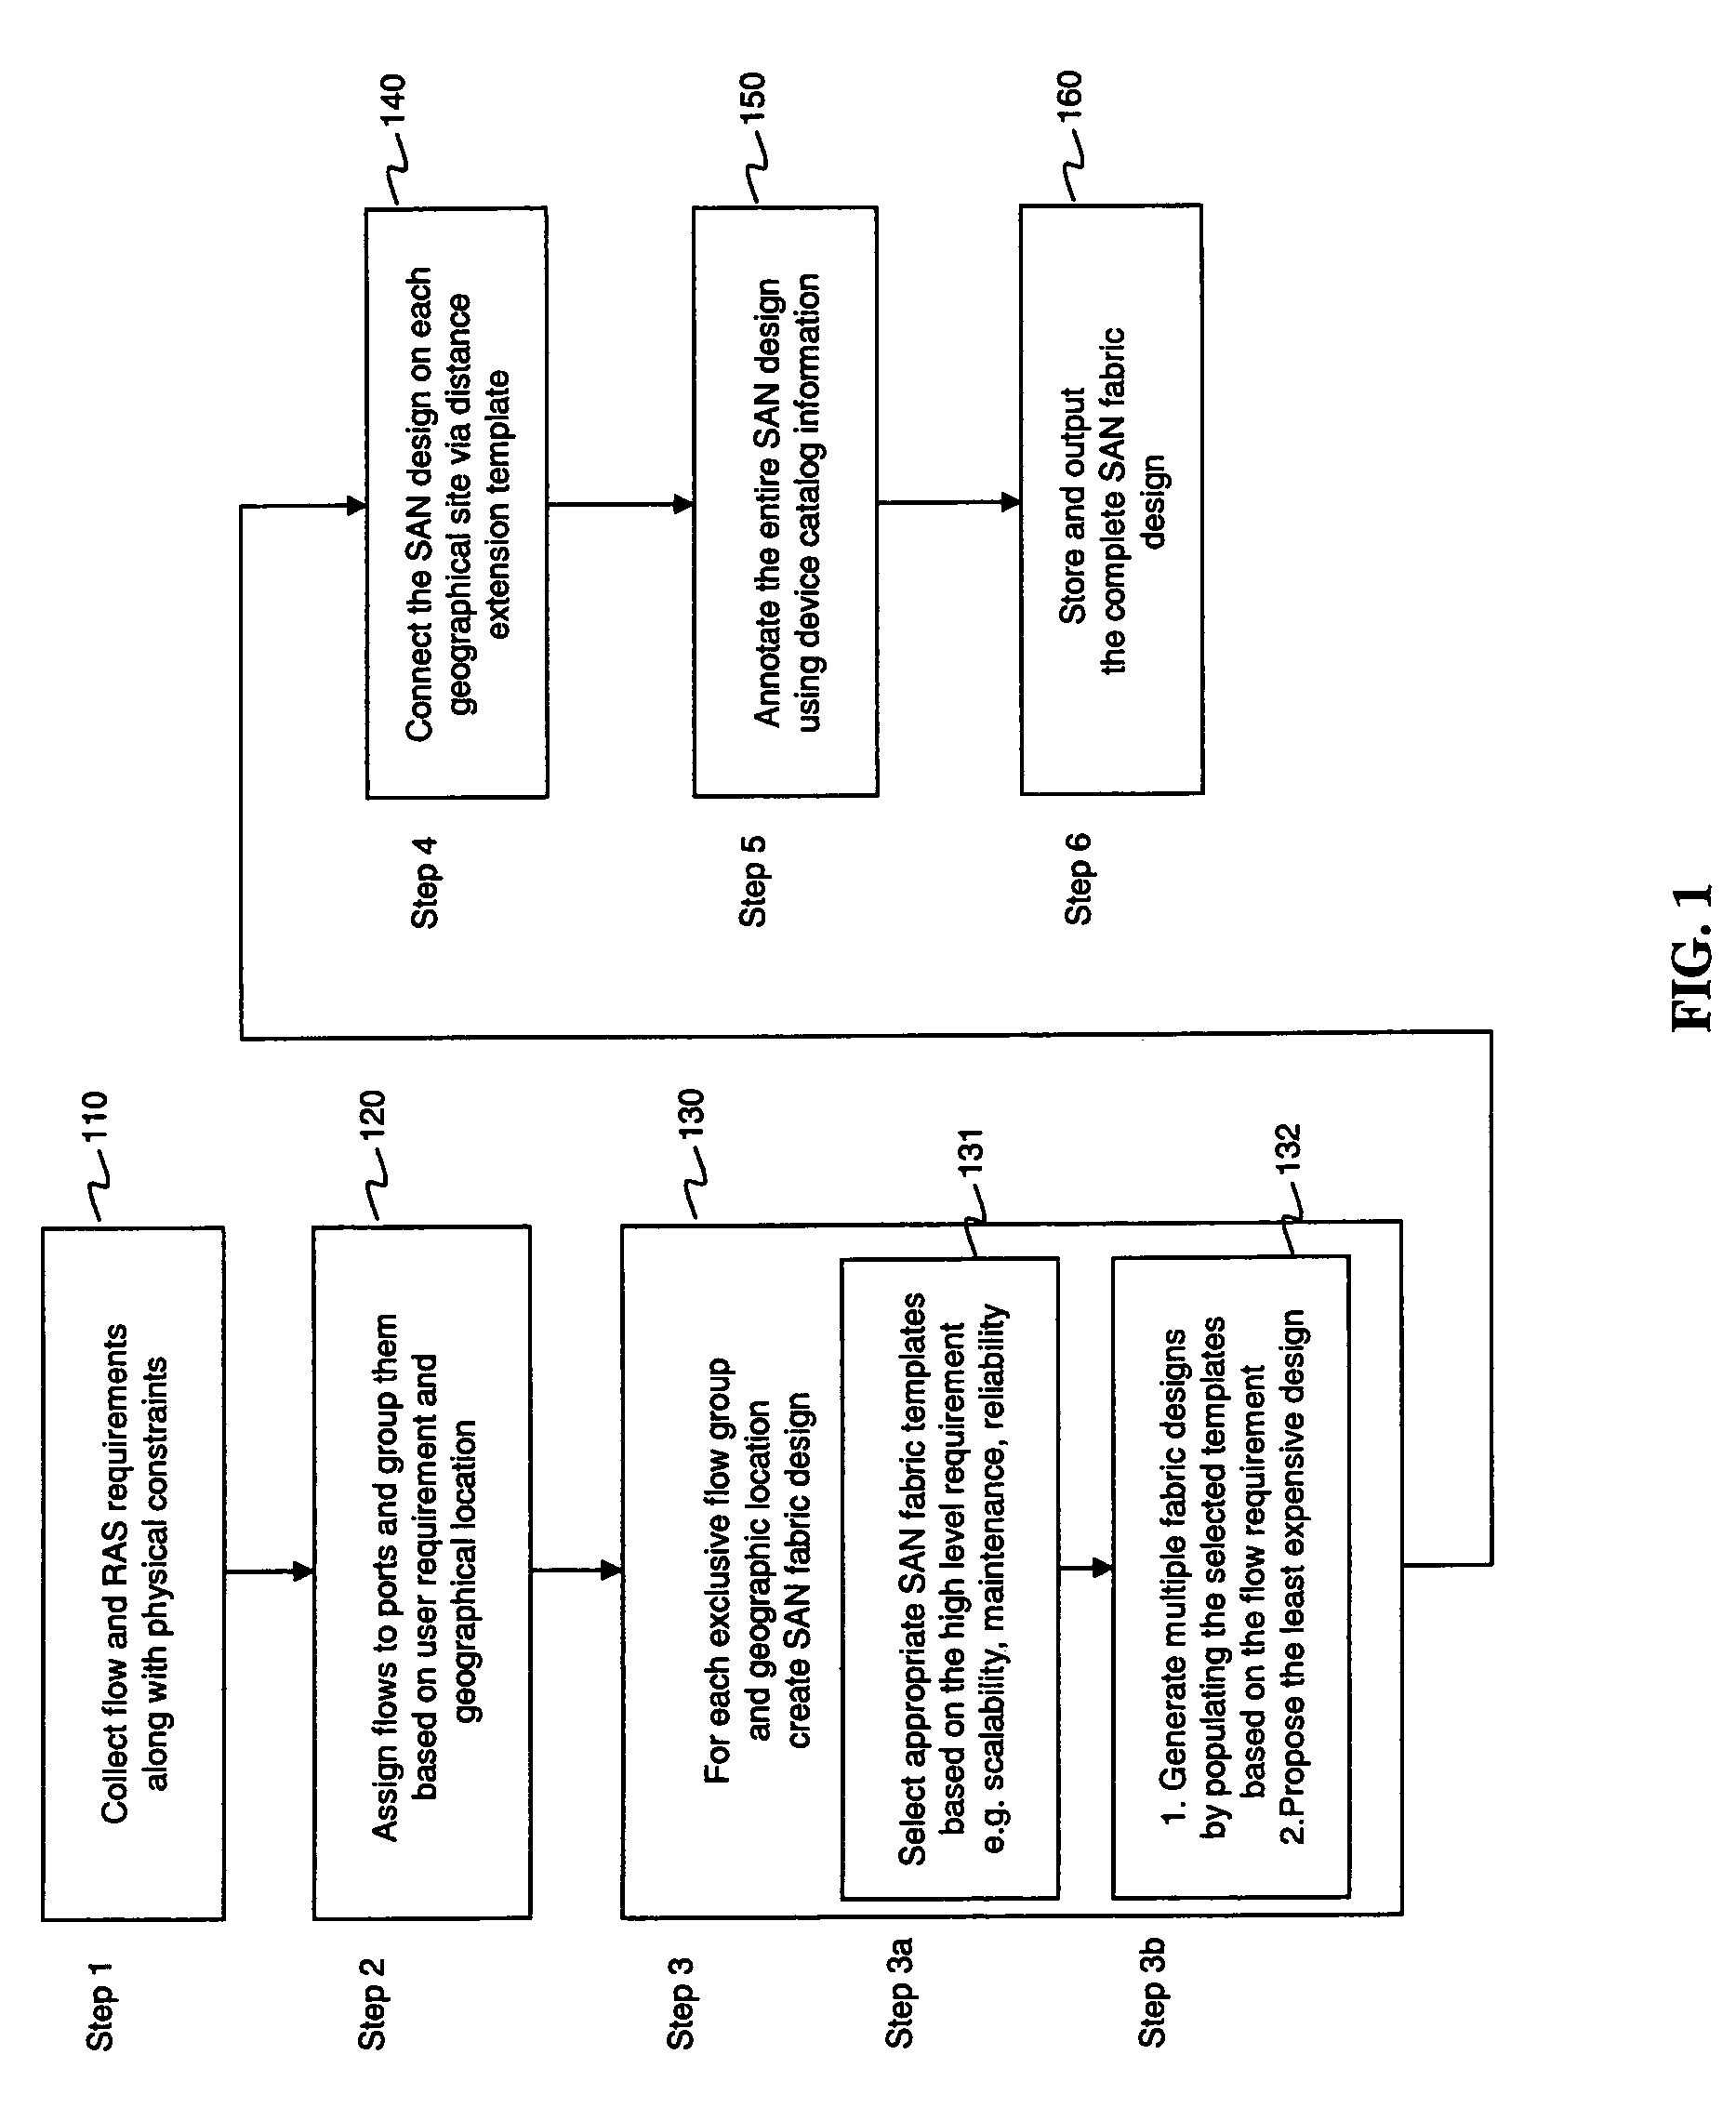 Systems and methods for storage area network design